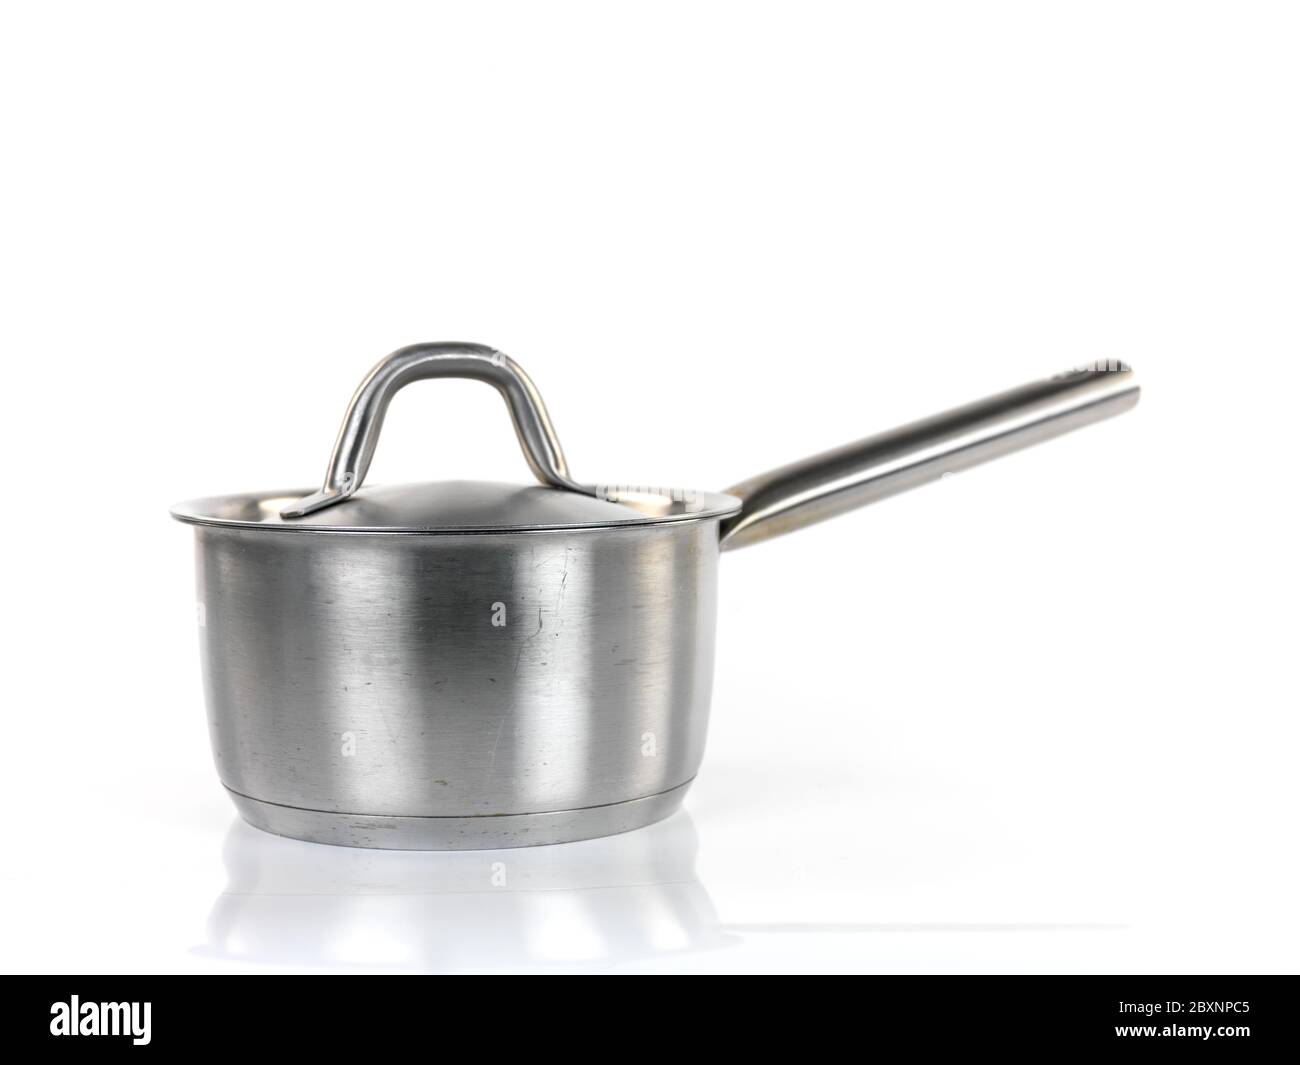 https://c8.alamy.com/comp/2BXNPC5/pots-and-pans-isolayed-against-a-white-background-2BXNPC5.jpg